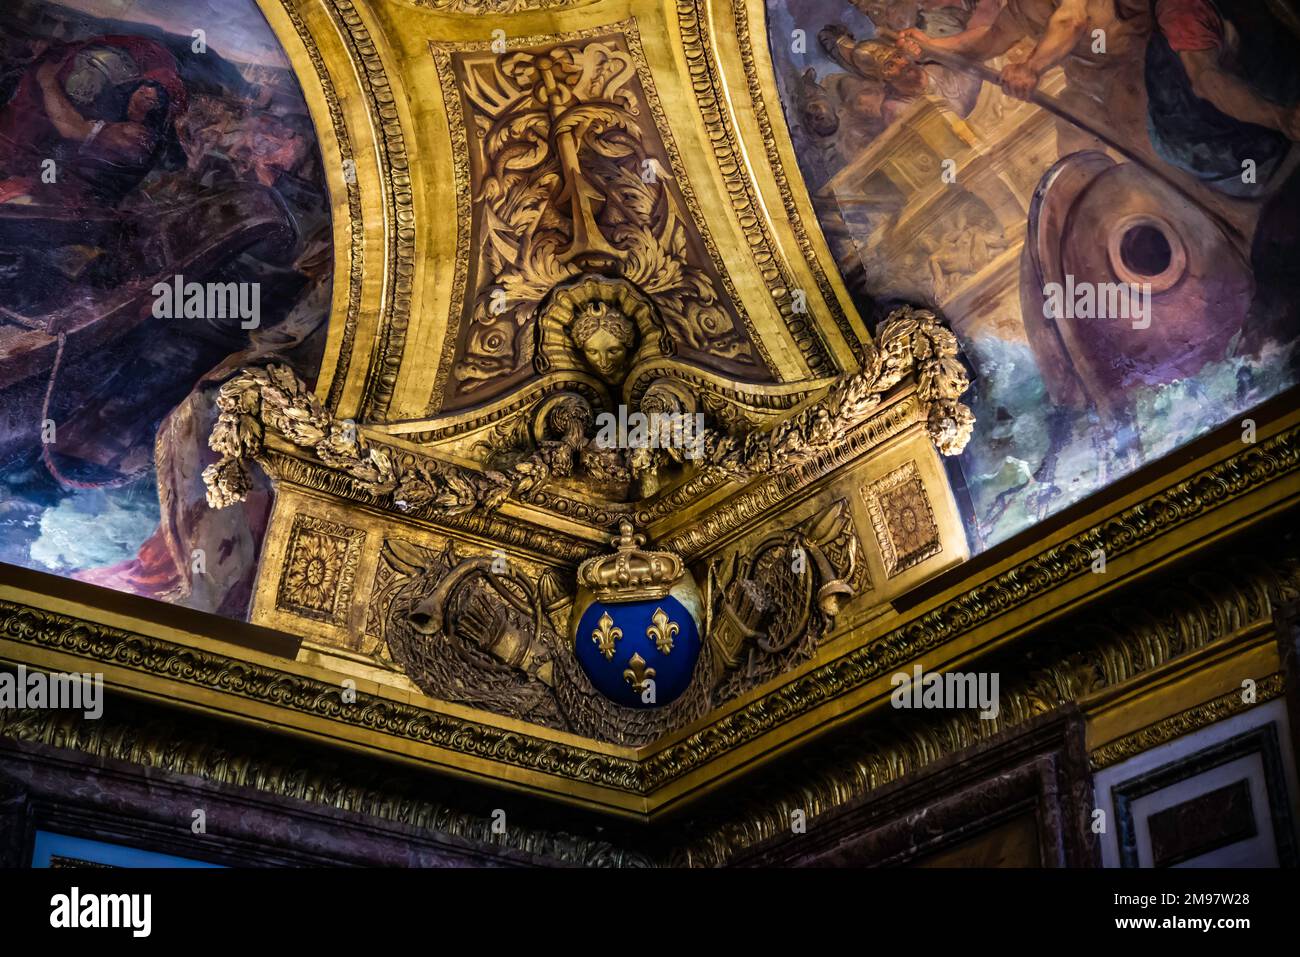 Paris, France - Dec. 28 2022: The highly decorative chandelier in Versaille Palace Stock Photo